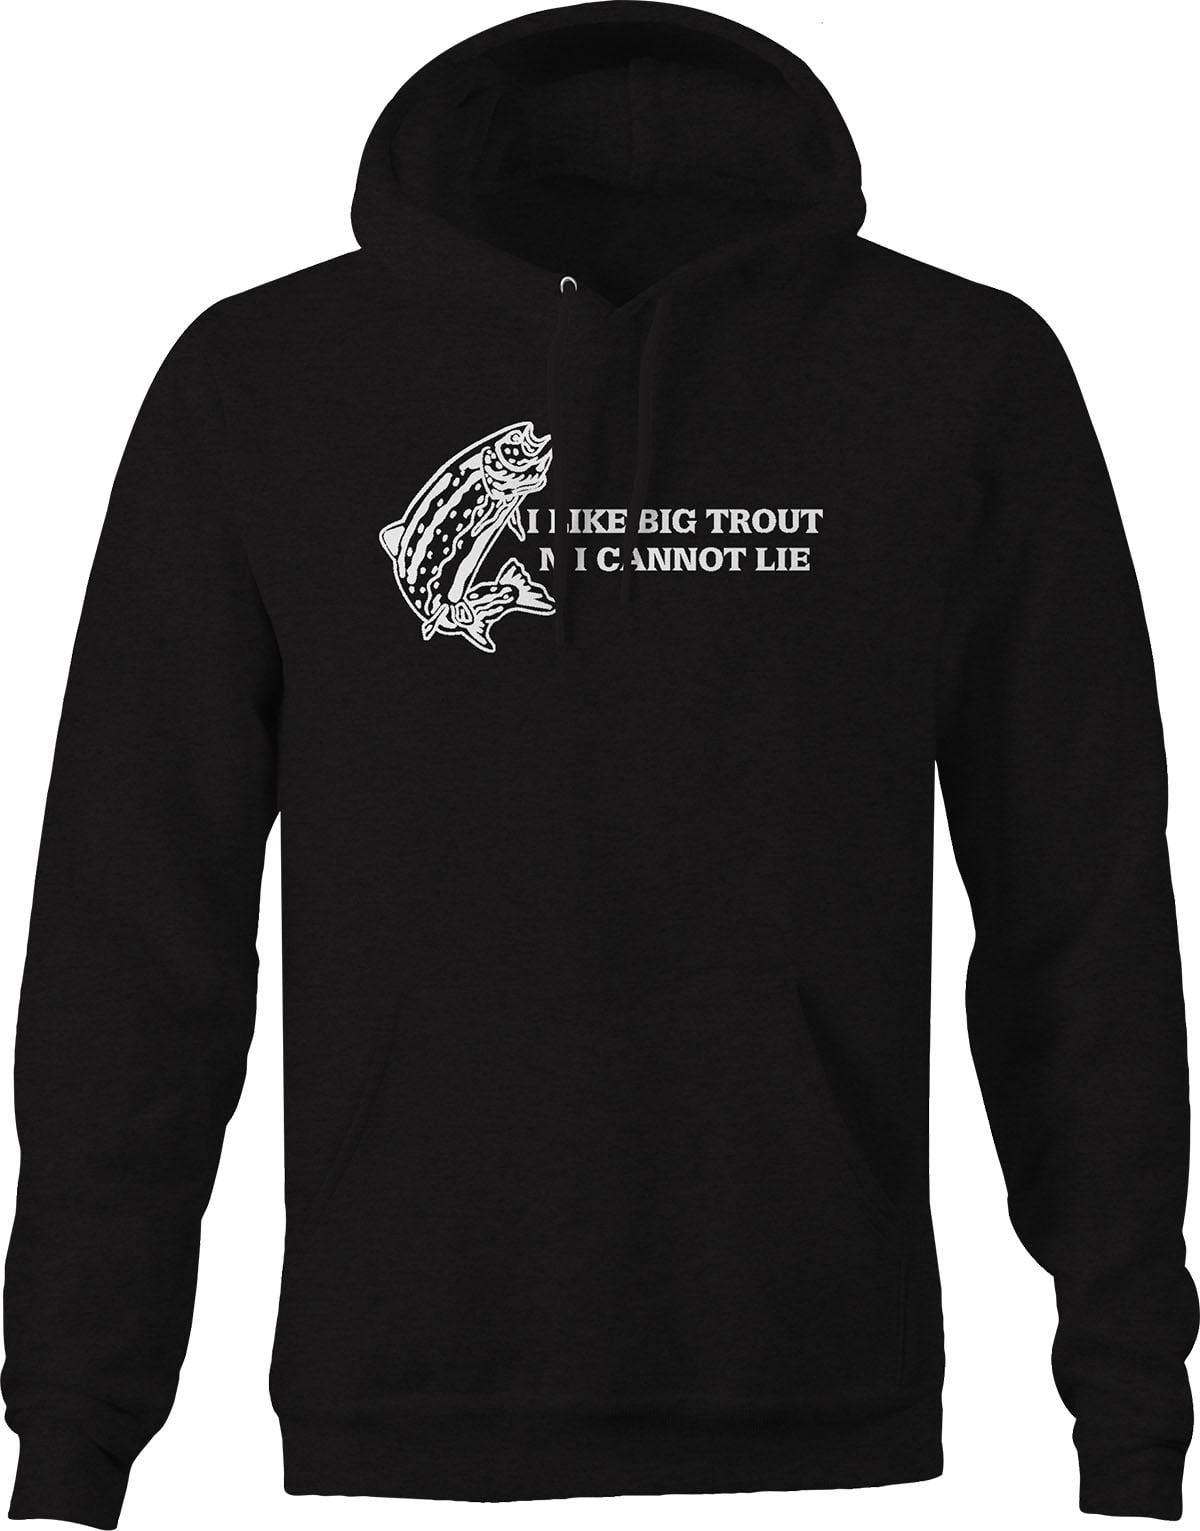 I Like Big TROUT Cannot Lie Fishing Funny Graphic Hoodies Xlarge Black 